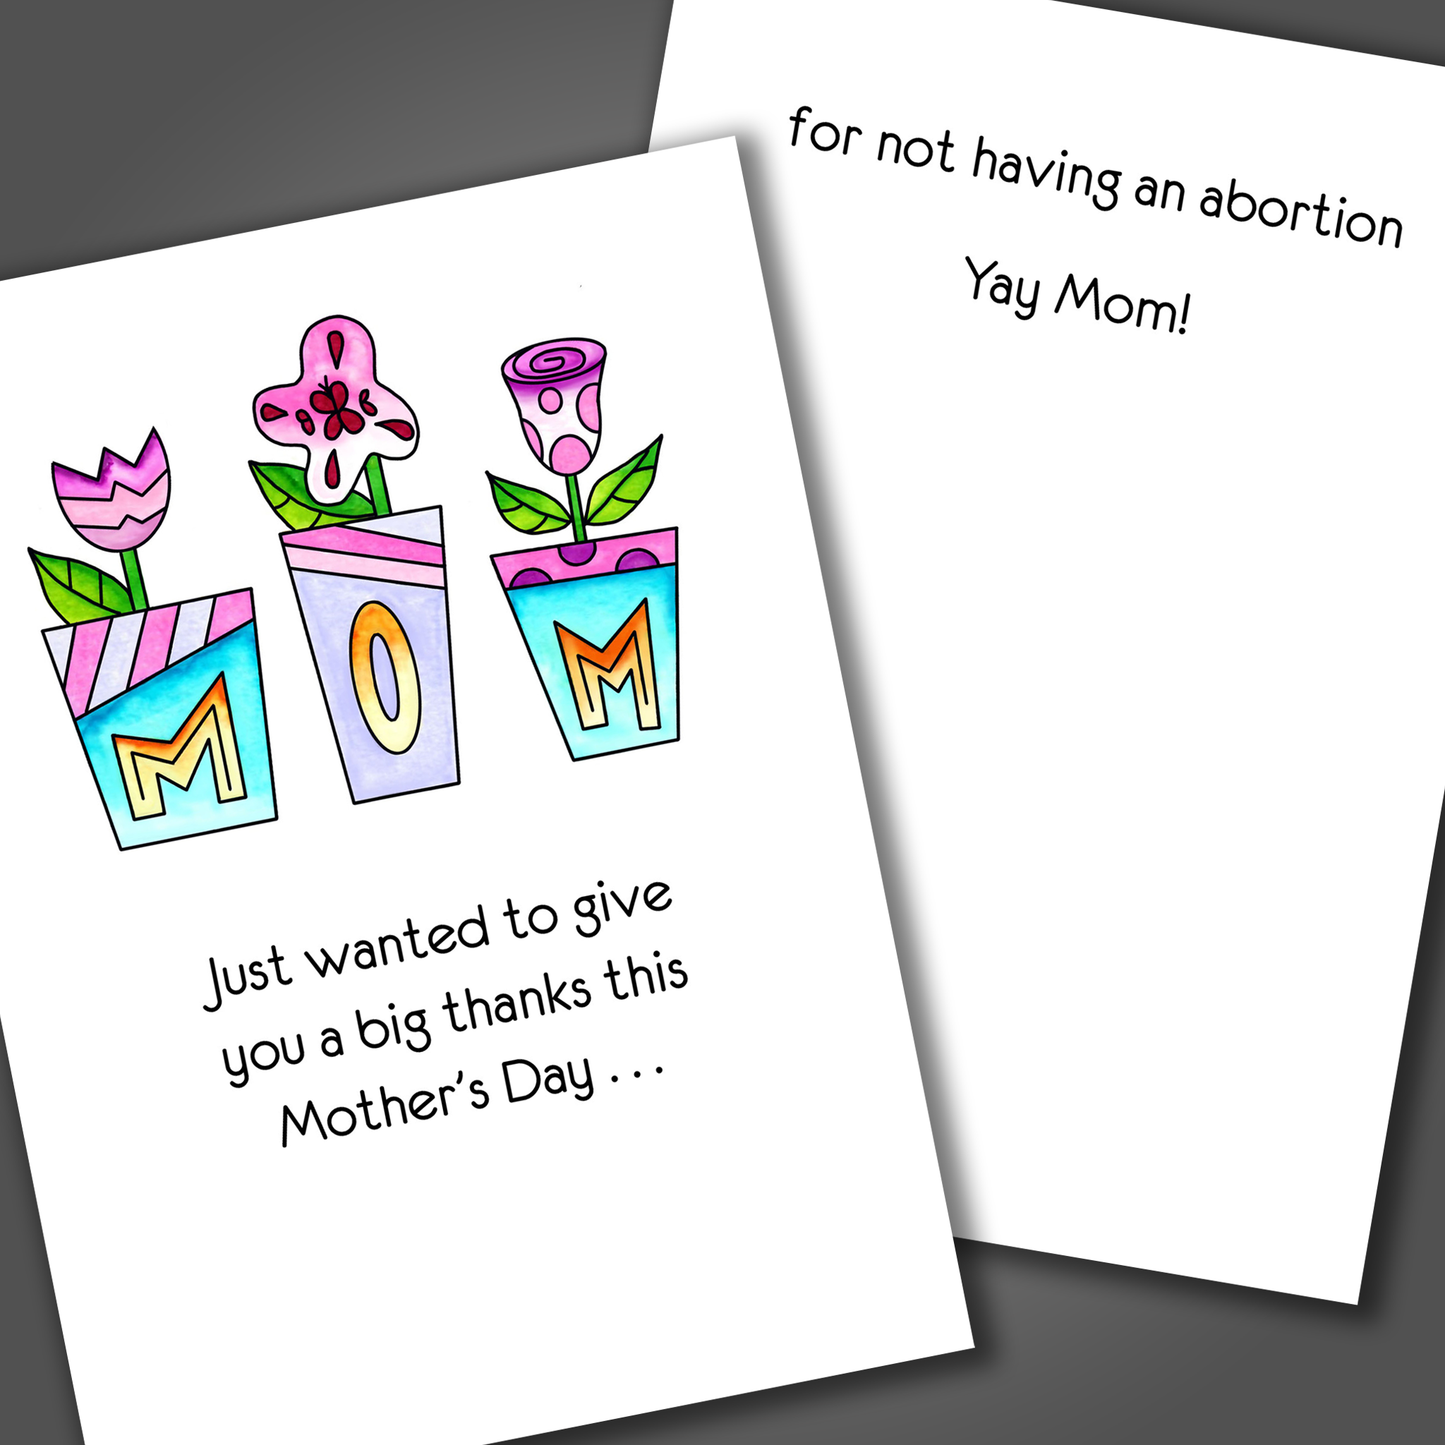 Funny happy mother's day card with three pink and green flowers drawn on the front of the card. Inside the card is a funny joke that says thanks for not having an abortion mom!